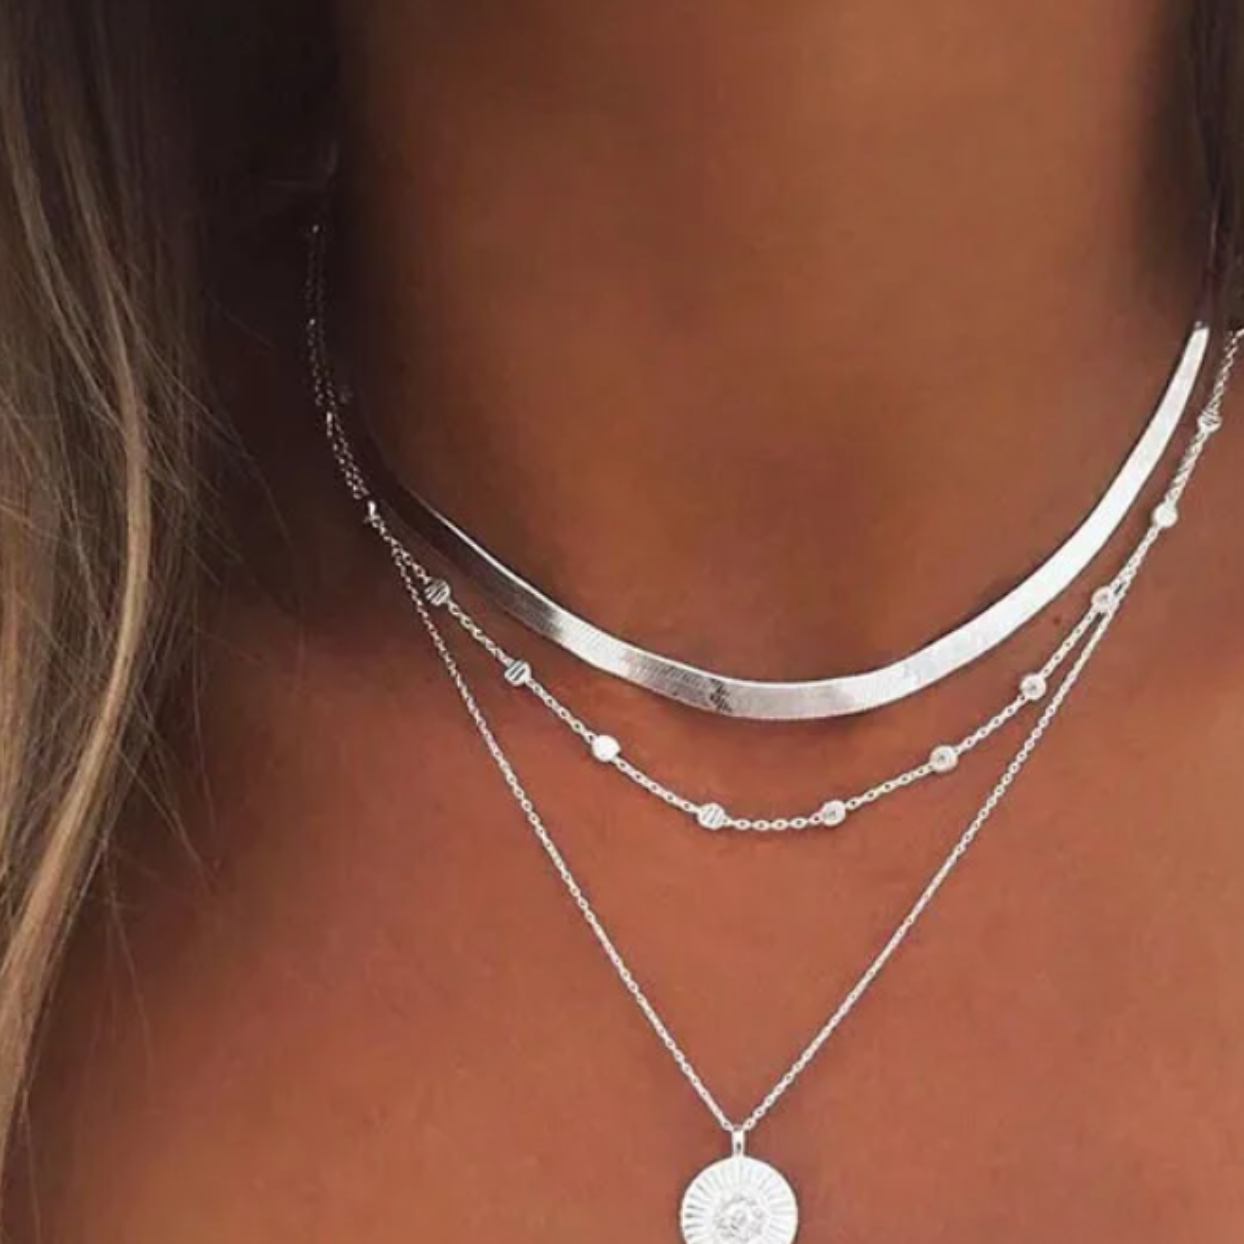 CLASSIC SILVER SNAKE - WATER PROOF NECKLACE - Premium necklaces from www.beachboho.com.au - Just $55! Shop now at www.beachboho.com.au